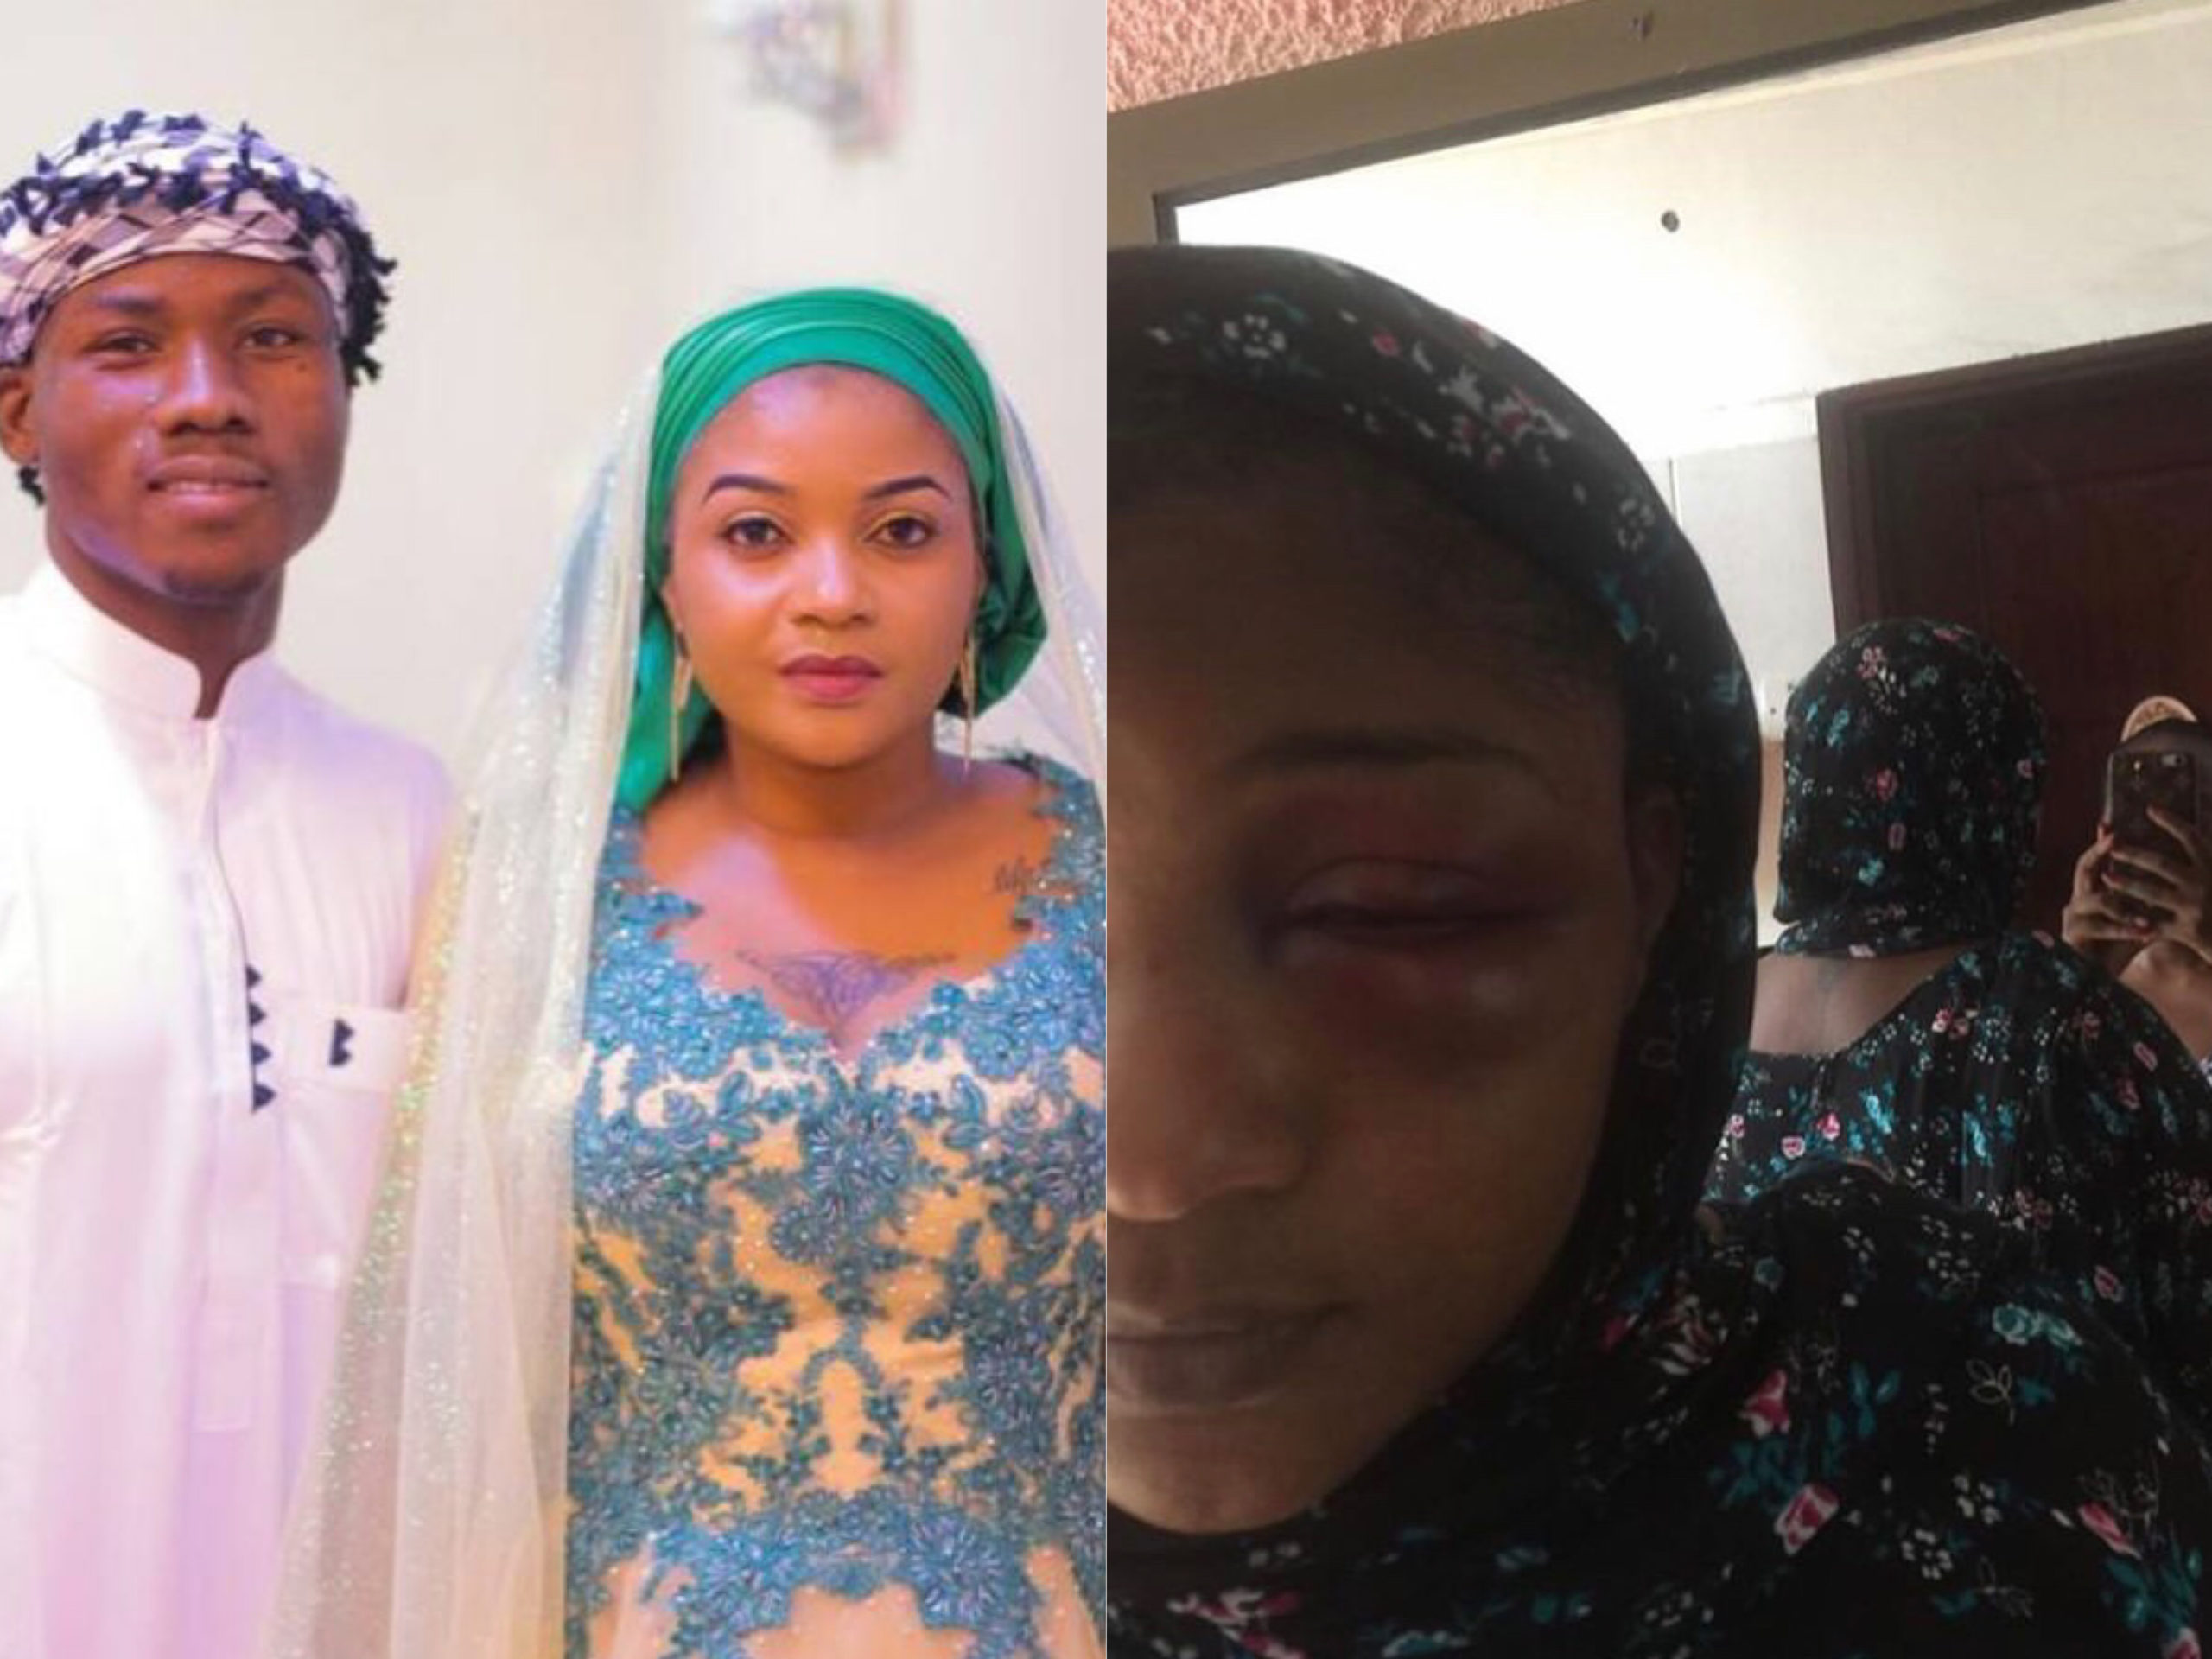 Shilole left looking unrecognizable after receiving serious beating from young husband (Photos)